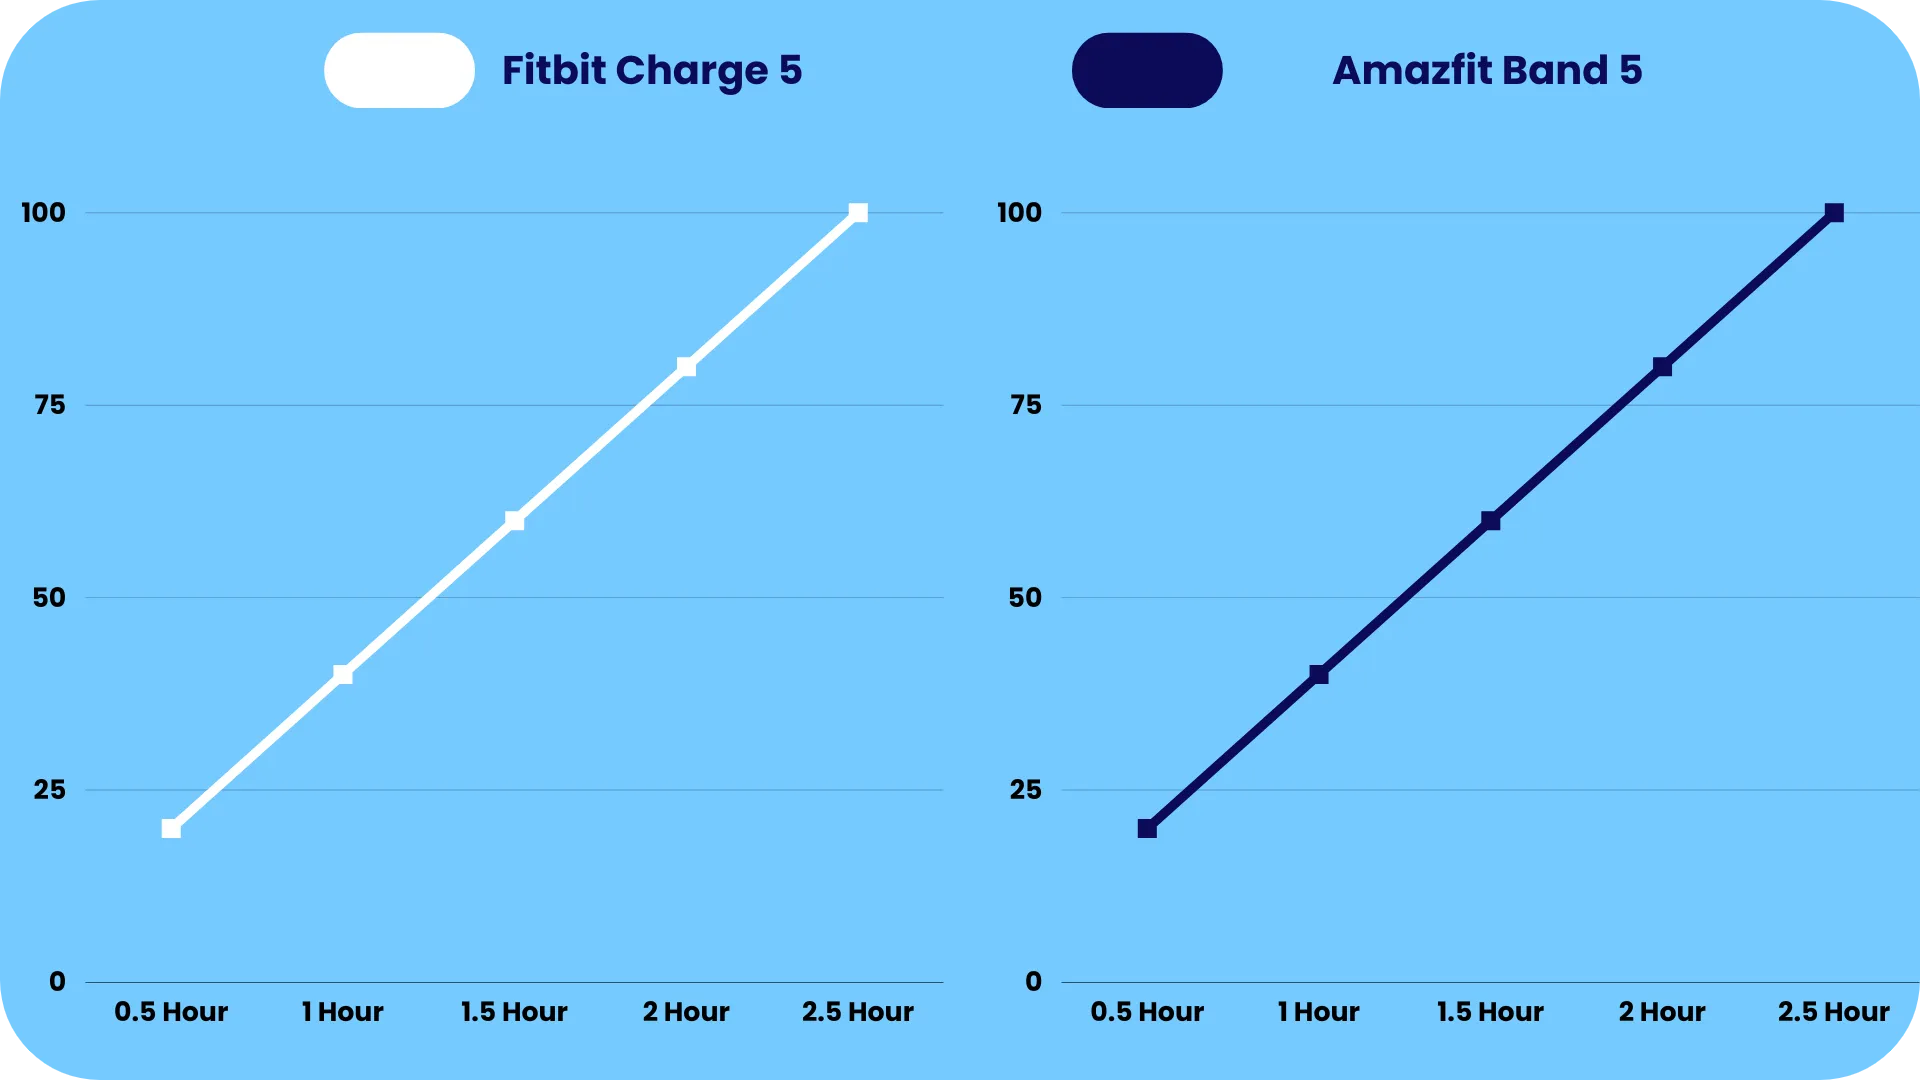 Charging Time Comparison of Fitbit C